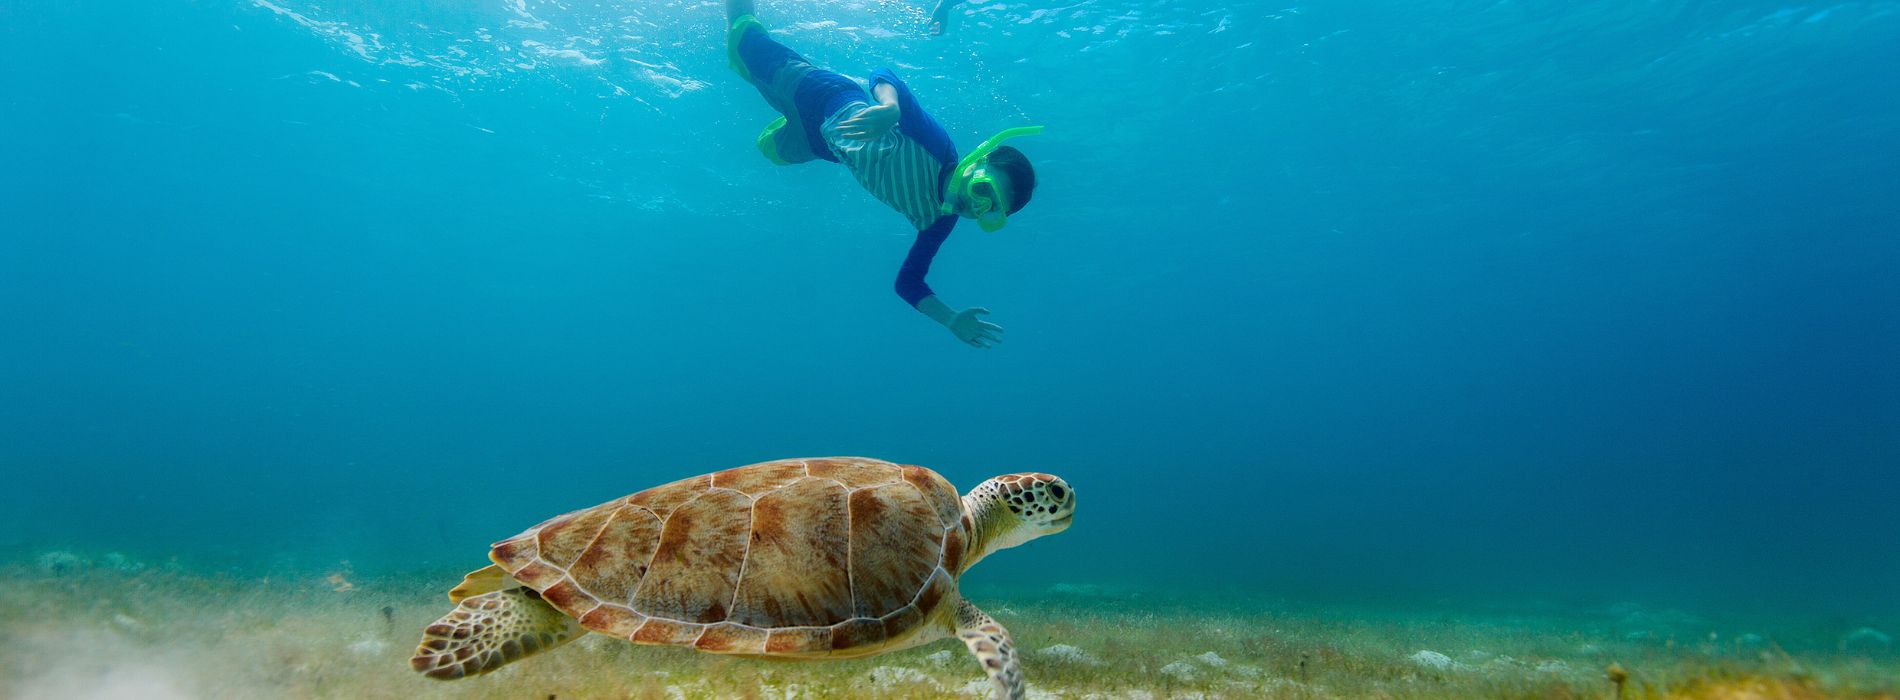 Snorkel with Sea Turtles in Curacao: An Unforgettable Experience - Madeinsea©